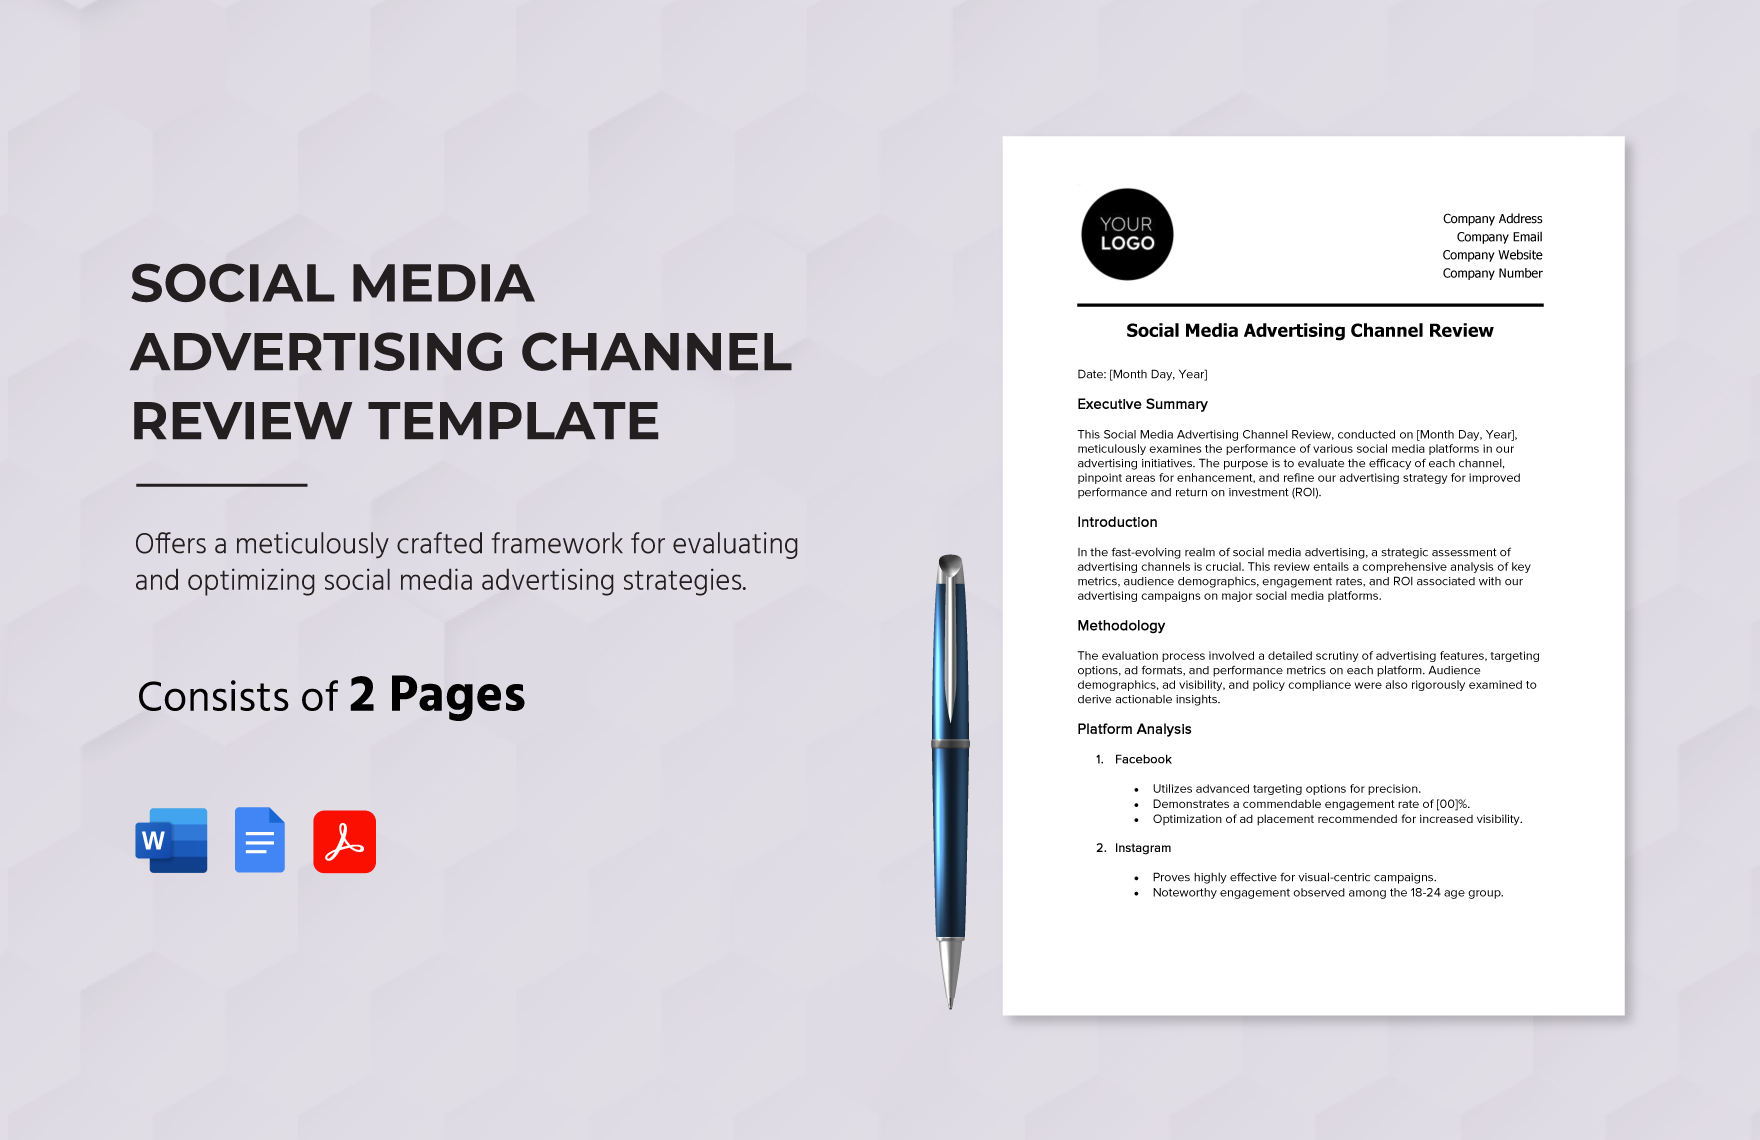 Social Media Advertising Channel Review Template